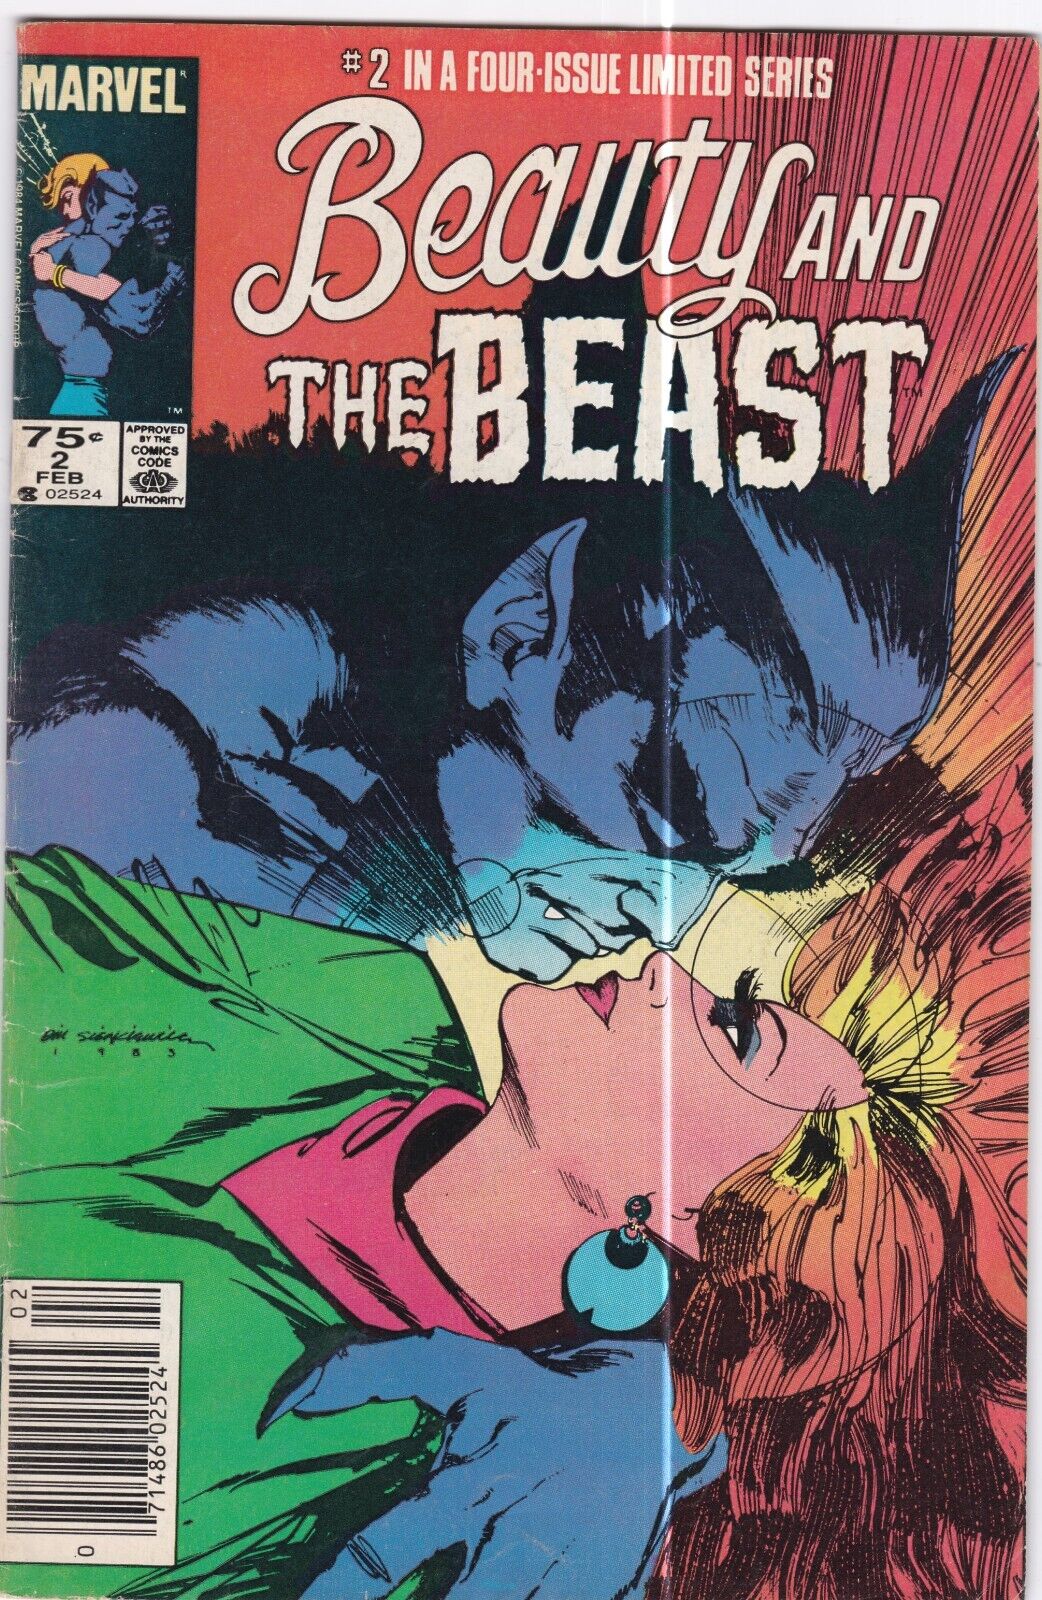 Beauty and the Beast #2: Marvel Comics. (1985)  VG/FN  (5.0)